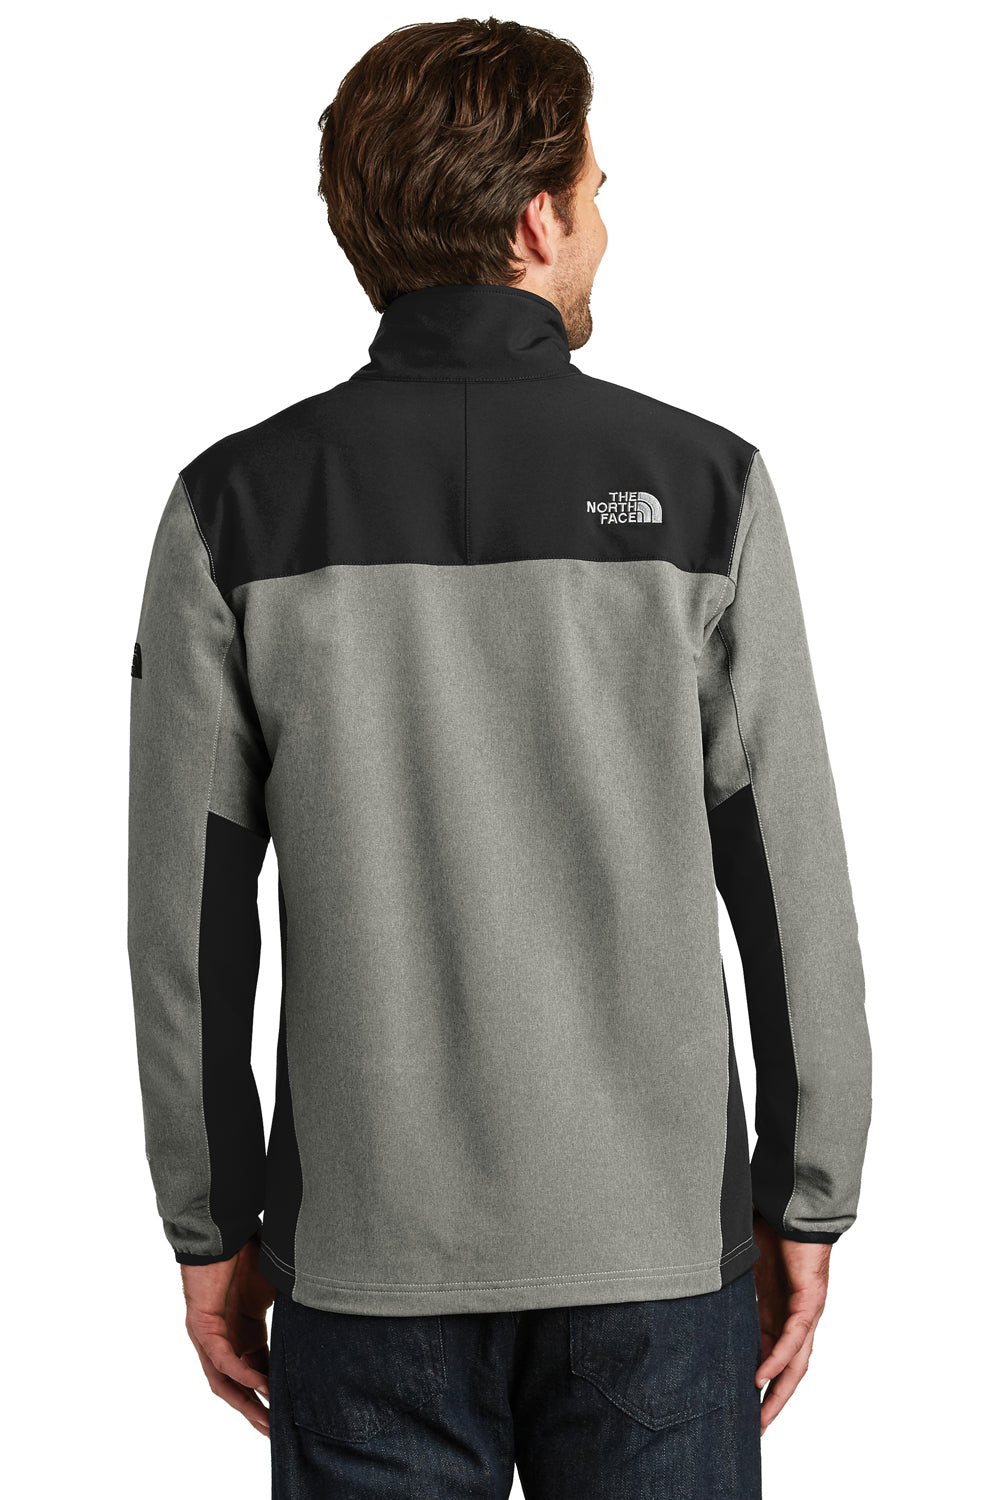 The North Face NF0A3LGV Mens Tech Wind & Water Resistant Full Zip Jacket Heather Medium Grey/Black Back